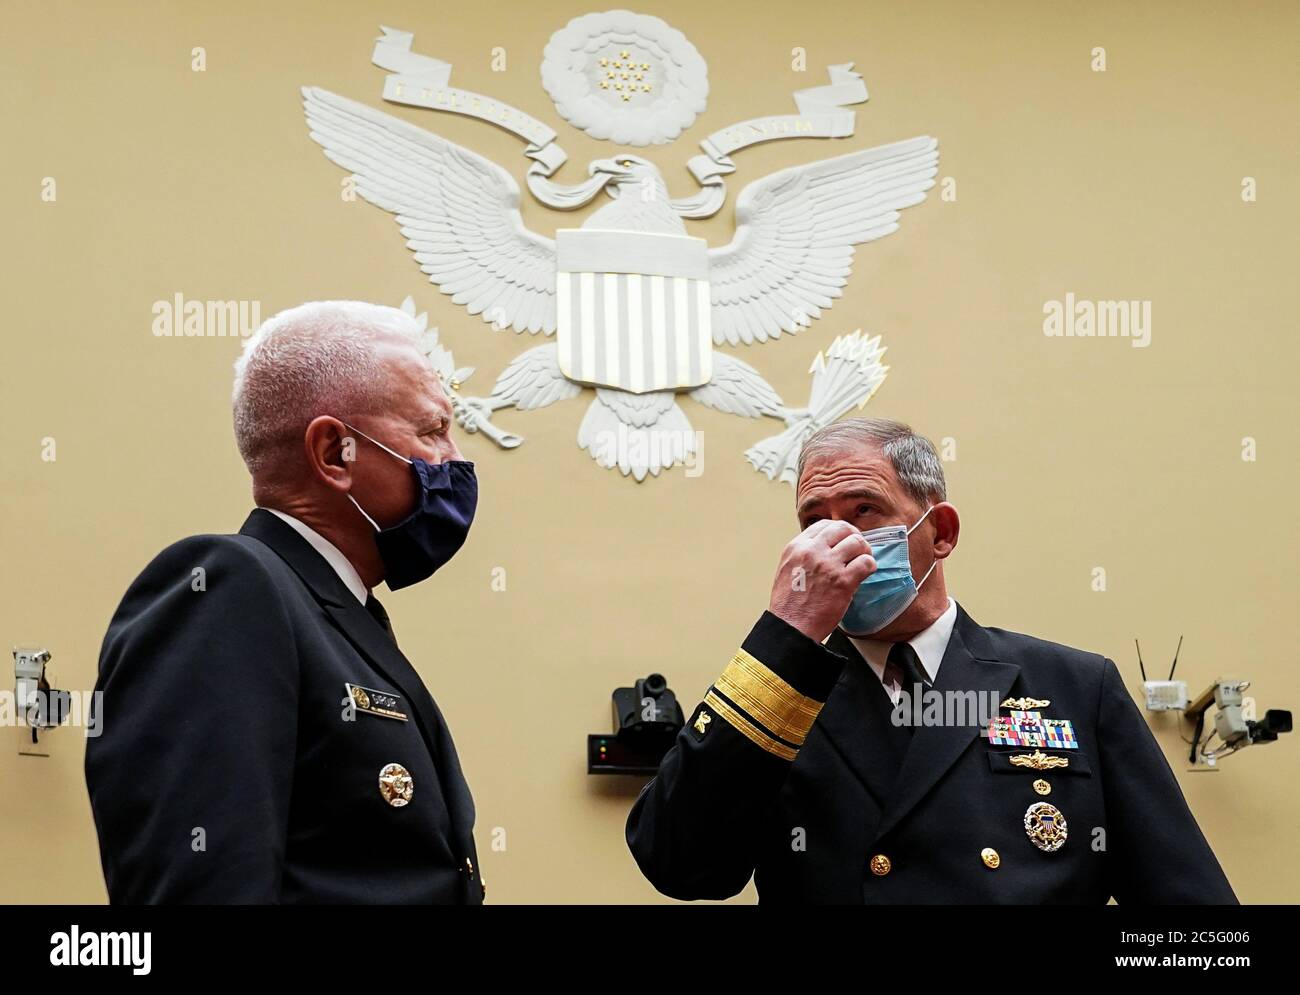 Washington, United States Of America. 02nd July, 2020. Admiral Brett Giroir, United States Assistant Secretary for Health speaks with Rear Admiral John P. Polowczyk, Vice Director, J4, Joint Staff at the start of a House Select Subcommittee on the Coronavirus Crisis hearing on "The Administration Response to Ongoing Shortages of PPE and Critical Medical Supplies" on Capitol Hill in Washington, U.S., July 2, 2020. Credit: Kevin Lamarque/Pool via CNP | usage worldwide Credit: dpa/Alamy Live News Stock Photo